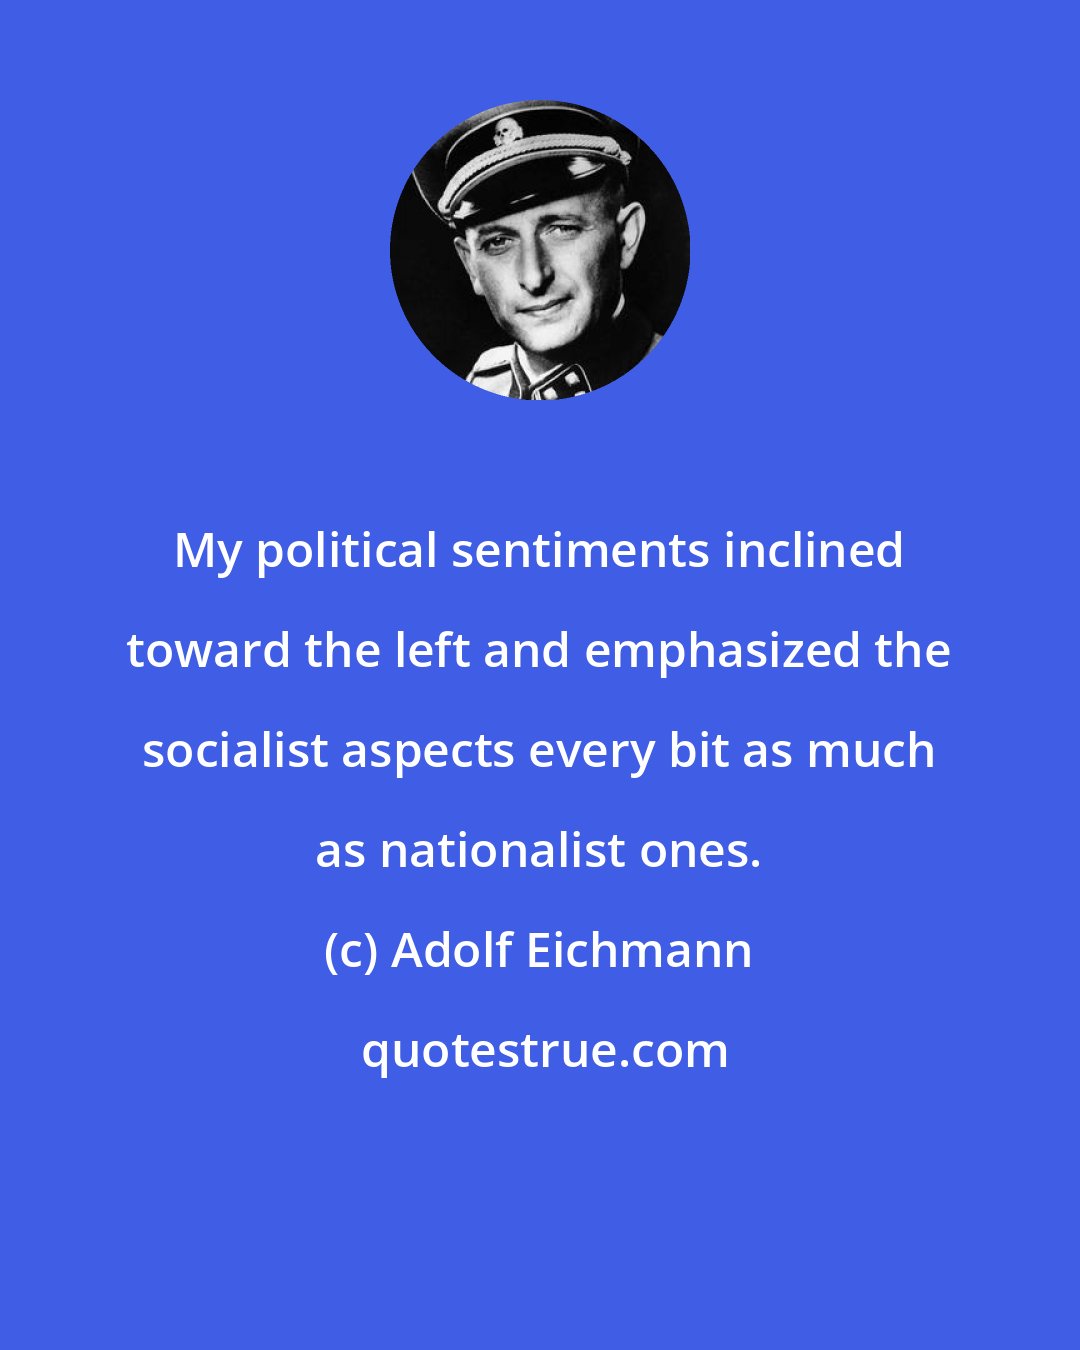 Adolf Eichmann: My political sentiments inclined toward the left and emphasized the socialist aspects every bit as much as nationalist ones.